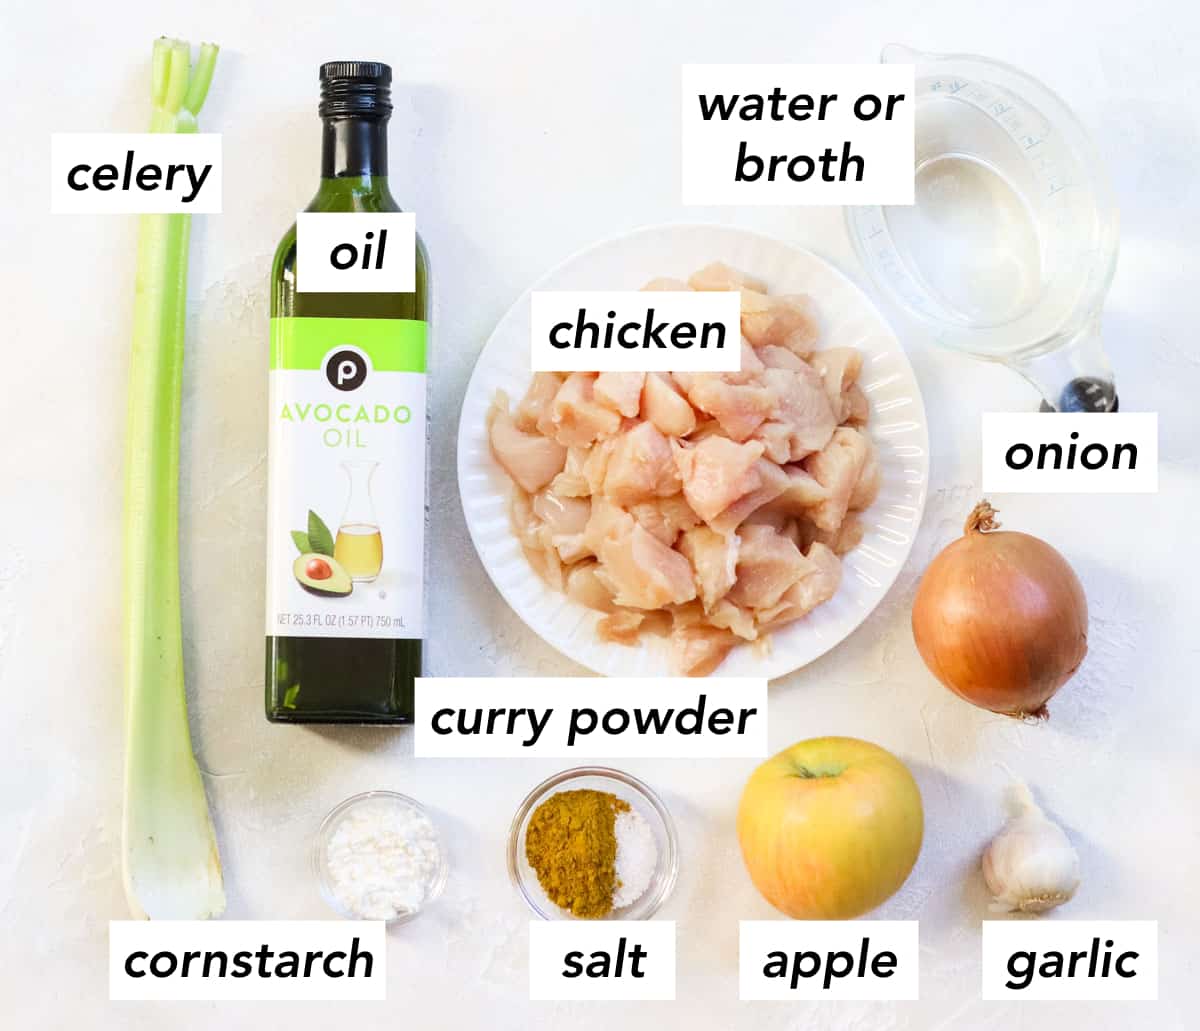 celery salt, bottle of avocado oil, bowl of cornstarch, plate of raw chicken, bowl of salt and curry powder, apple, head of garlic, yellow onion, and water in a measuring cup with text overlay describing ingredients.